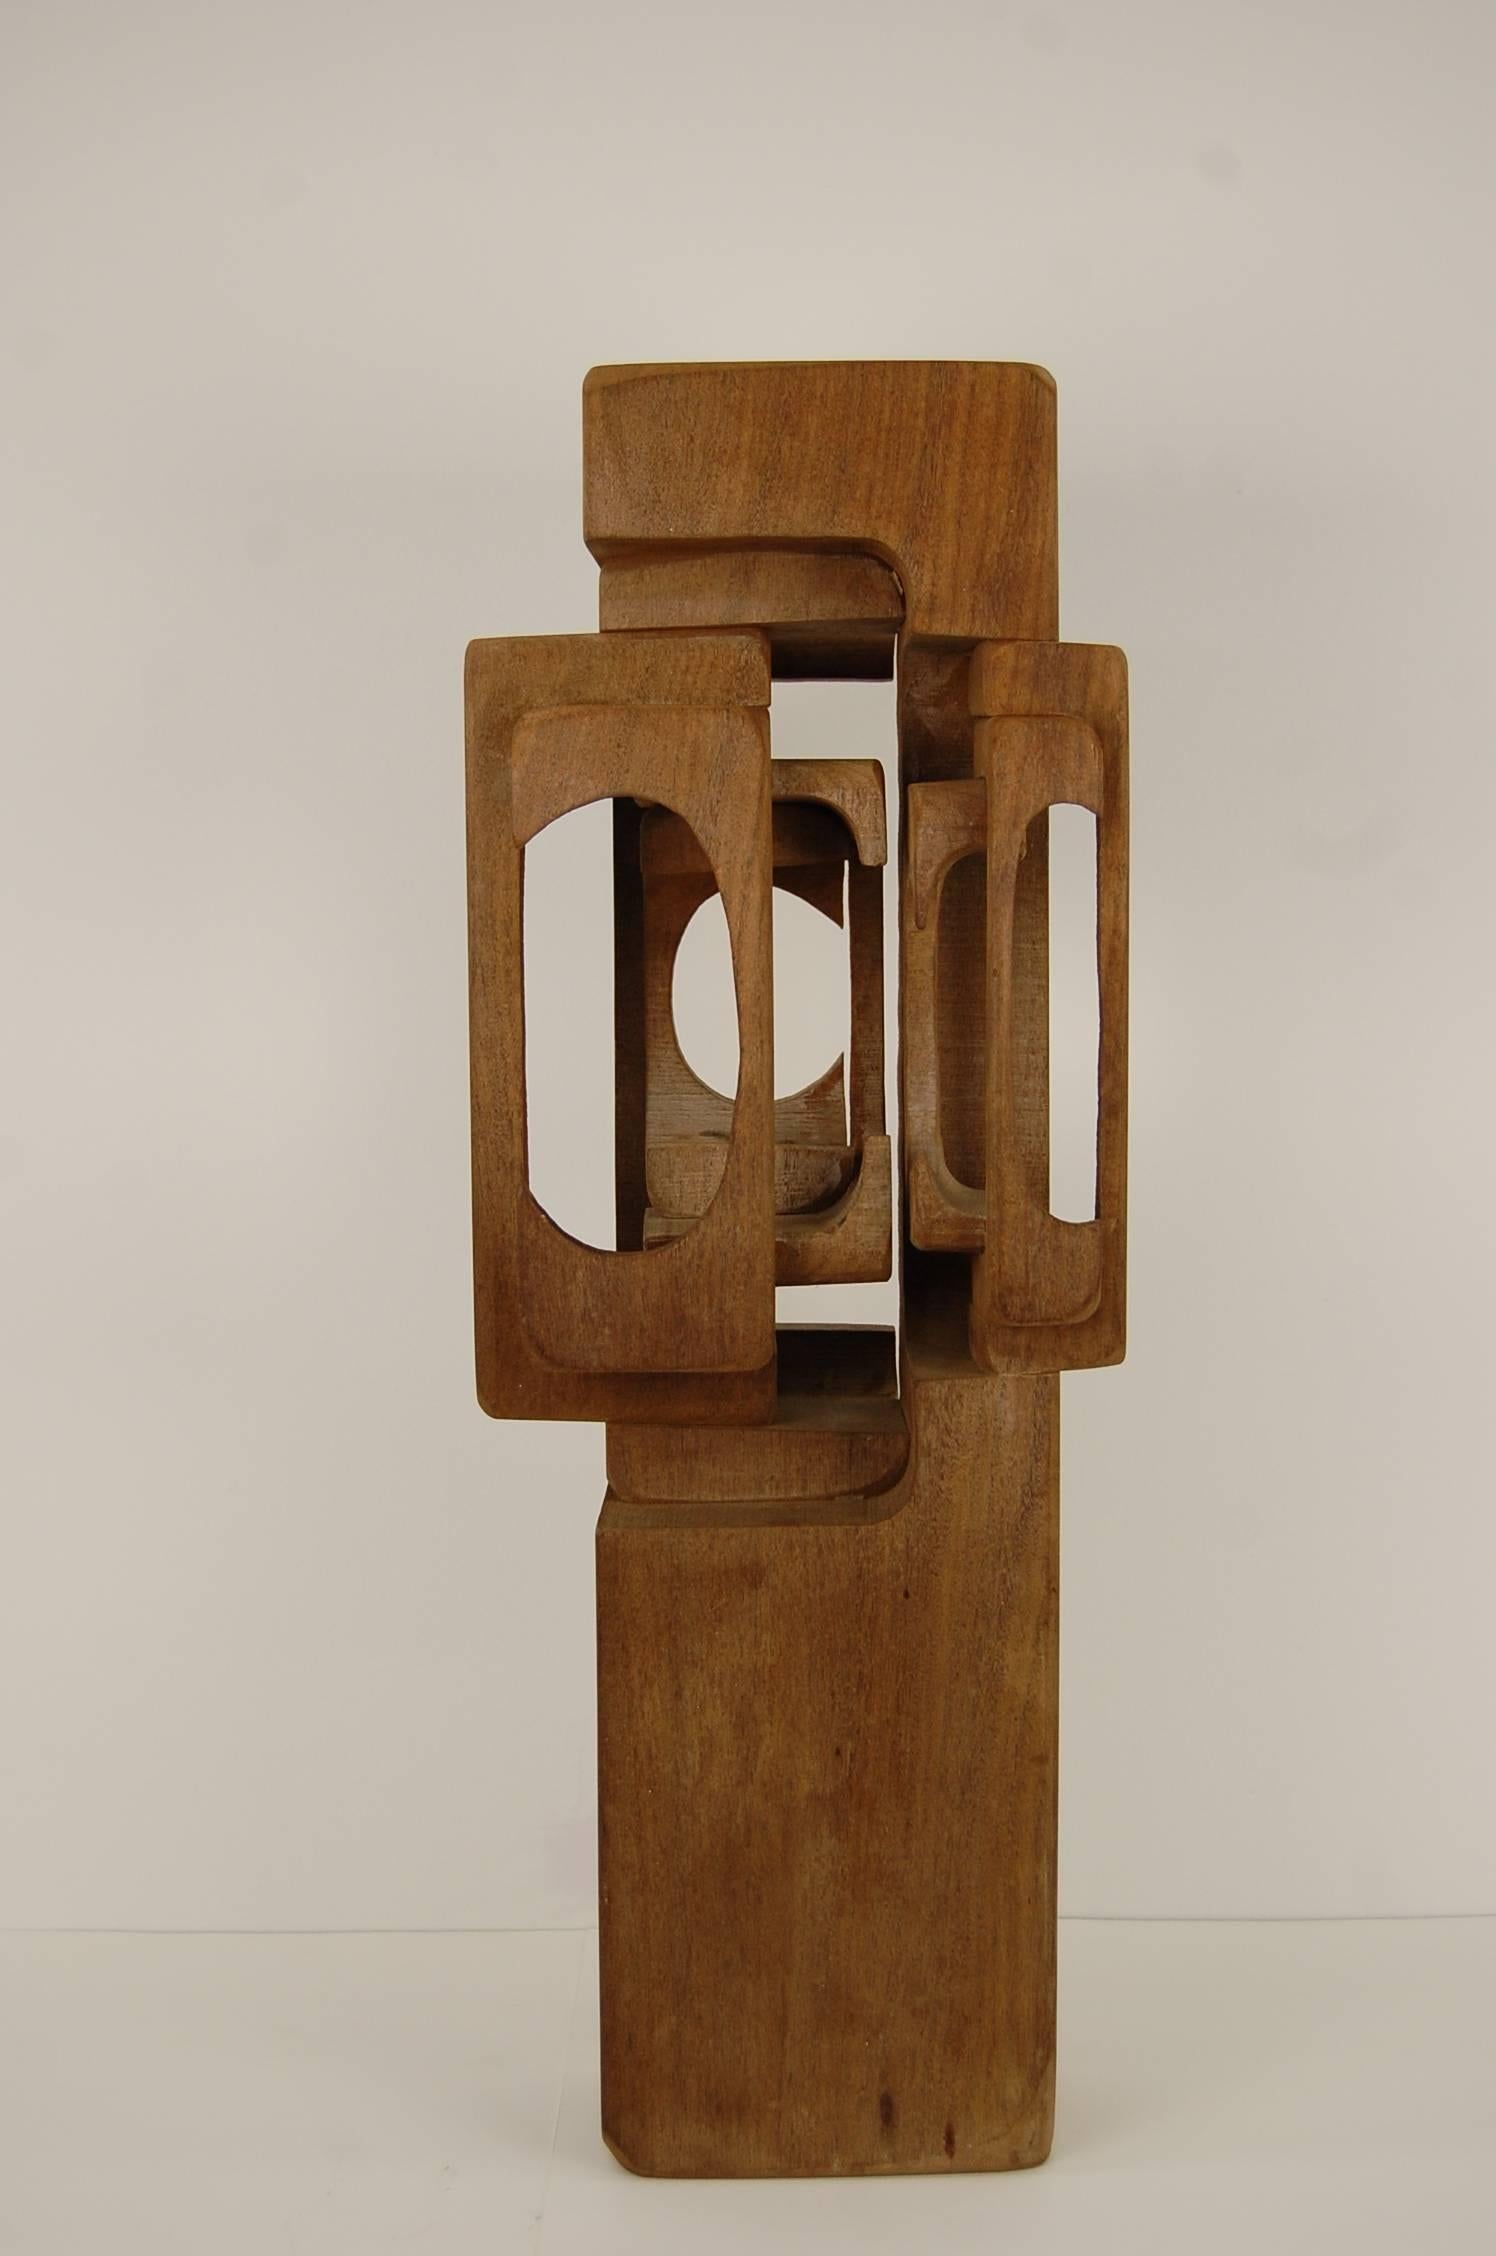 Abstract sculpture in solid teak, by British artist Brian Willsher (1930-2010). Fully signed and dated 1973. This is a relatively early piece by Willsher. Measures 23 1/6